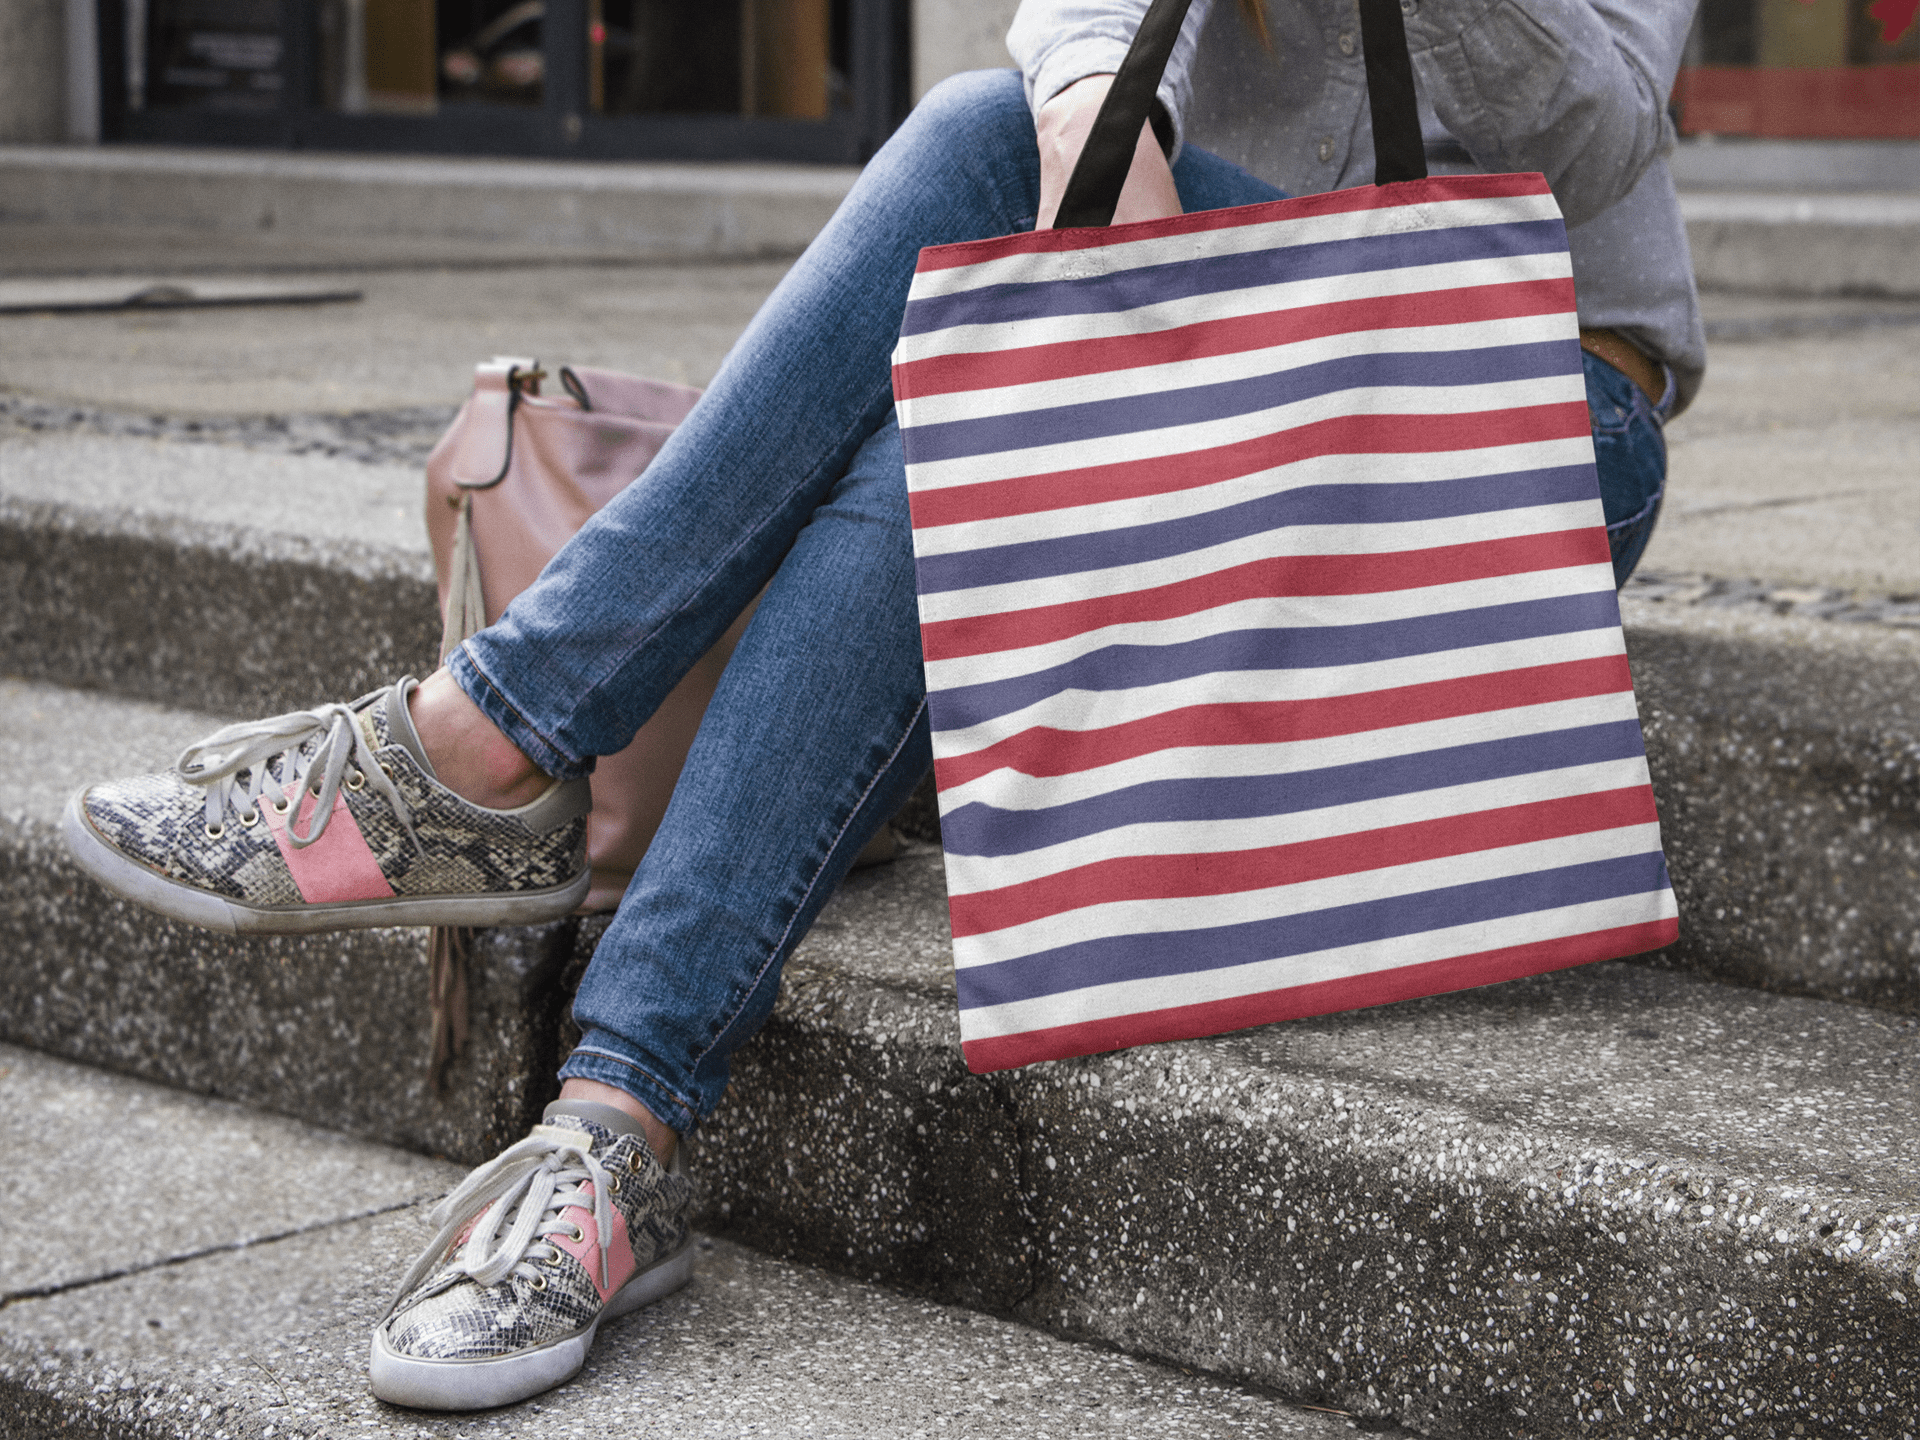 The Perfect Striped Series - Old Days Tote Shopping Shopper Bag - White Blue Red Strips Bags - Shopping bags A Moment Of Now Women’s Boutique Clothing Online Lifestyle Store